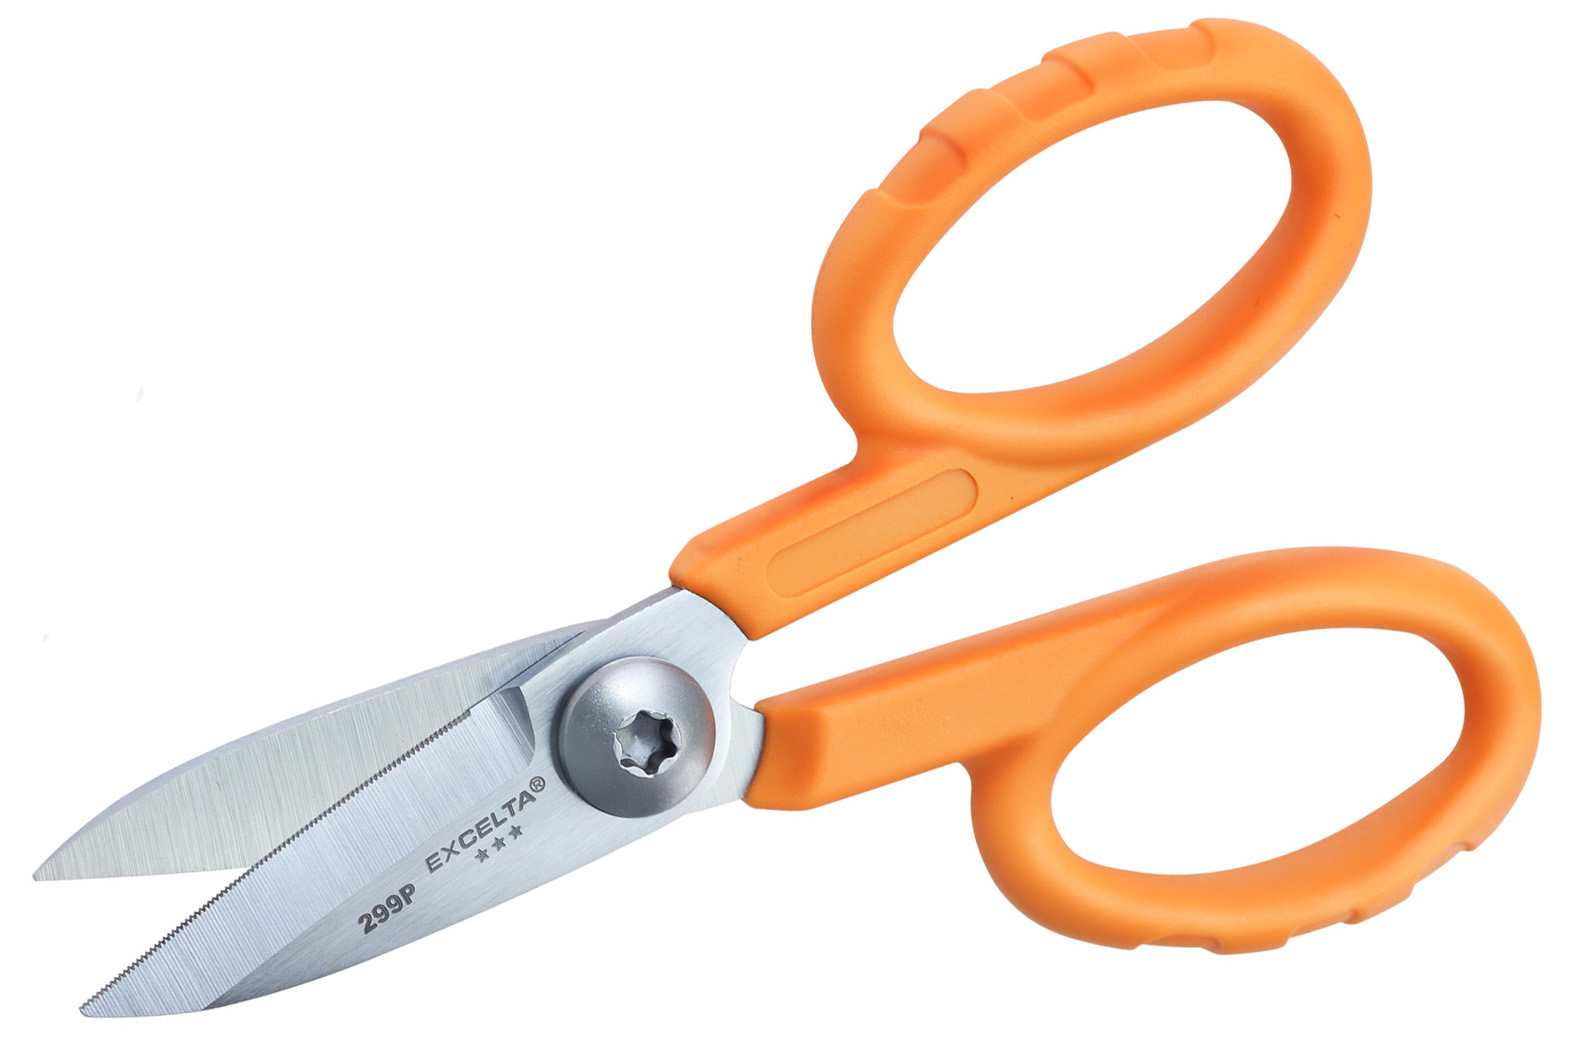 Excelta 299P 5.5 Inch Straight Scissor With High Carbon Steel Cutting Blades